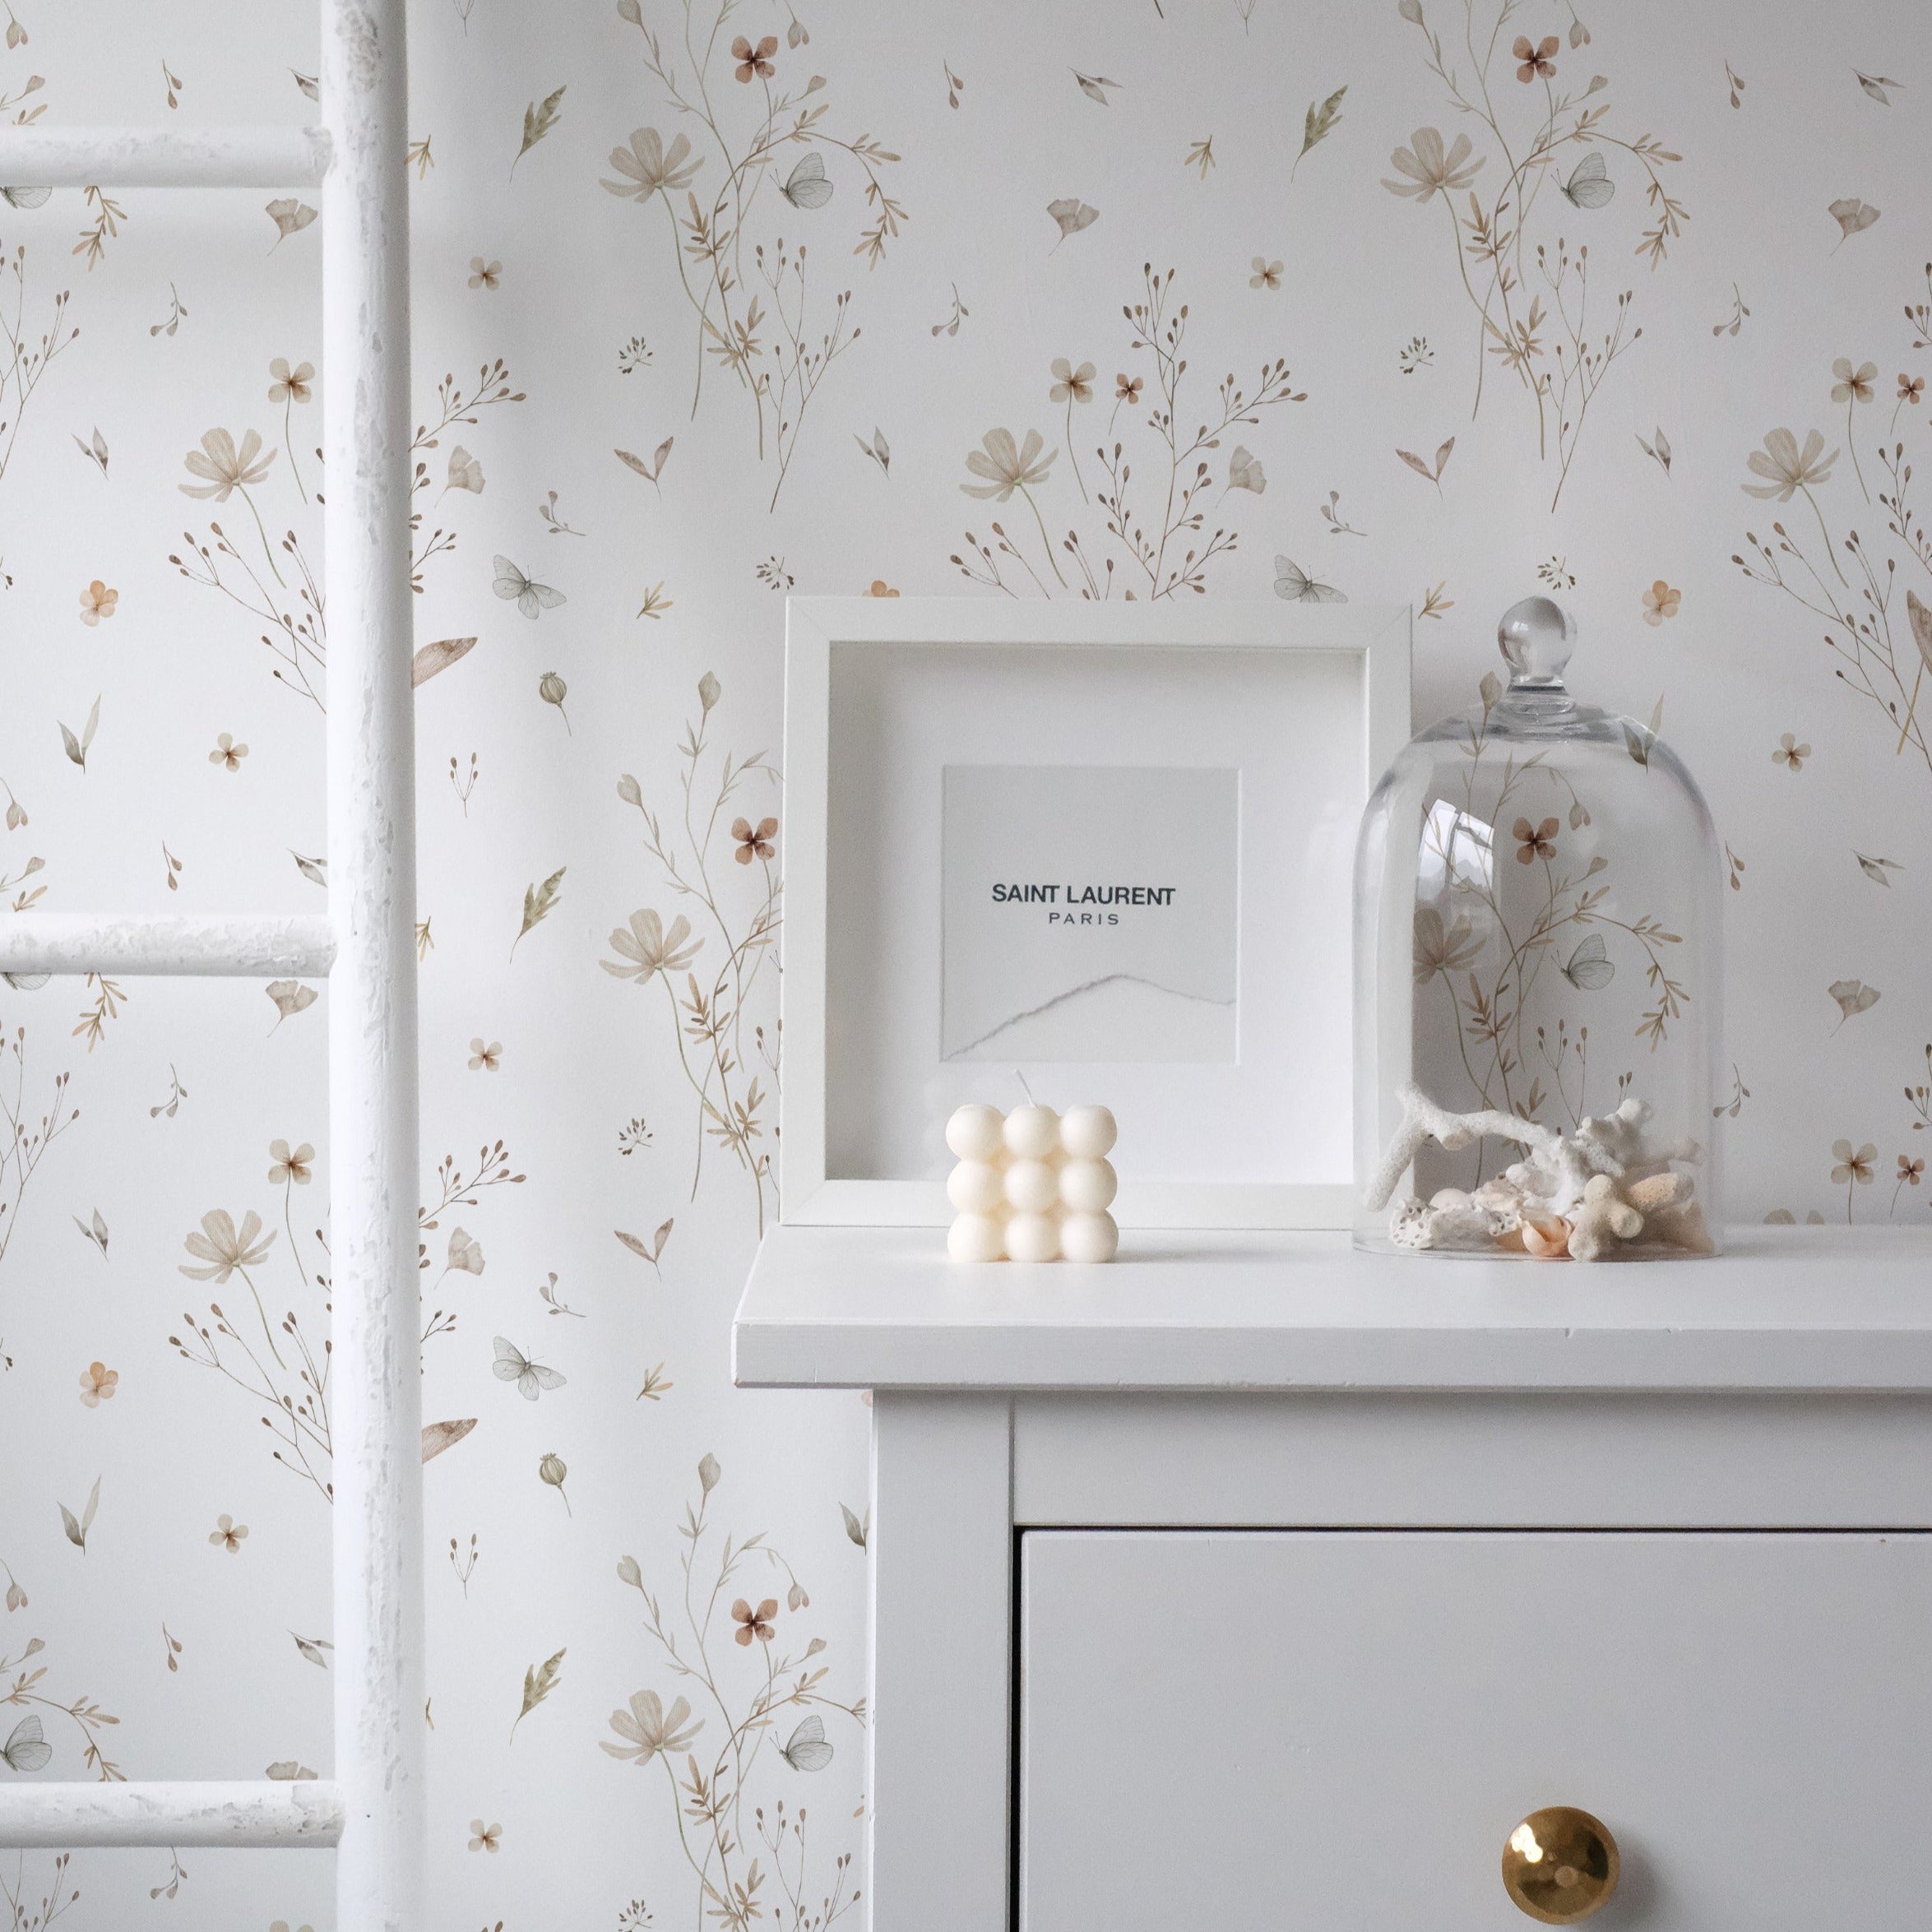 A close-up of a dresser against the Tranquil Bloom Wallpaper II, which is adorned with subtle illustrations of wildflowers and leaves in muted hues. The scene includes a white frame with a Saint Laurent logo, a bell jar with a collection of shells, and a cluster of decorative balls, creating a sophisticated and peaceful corner.